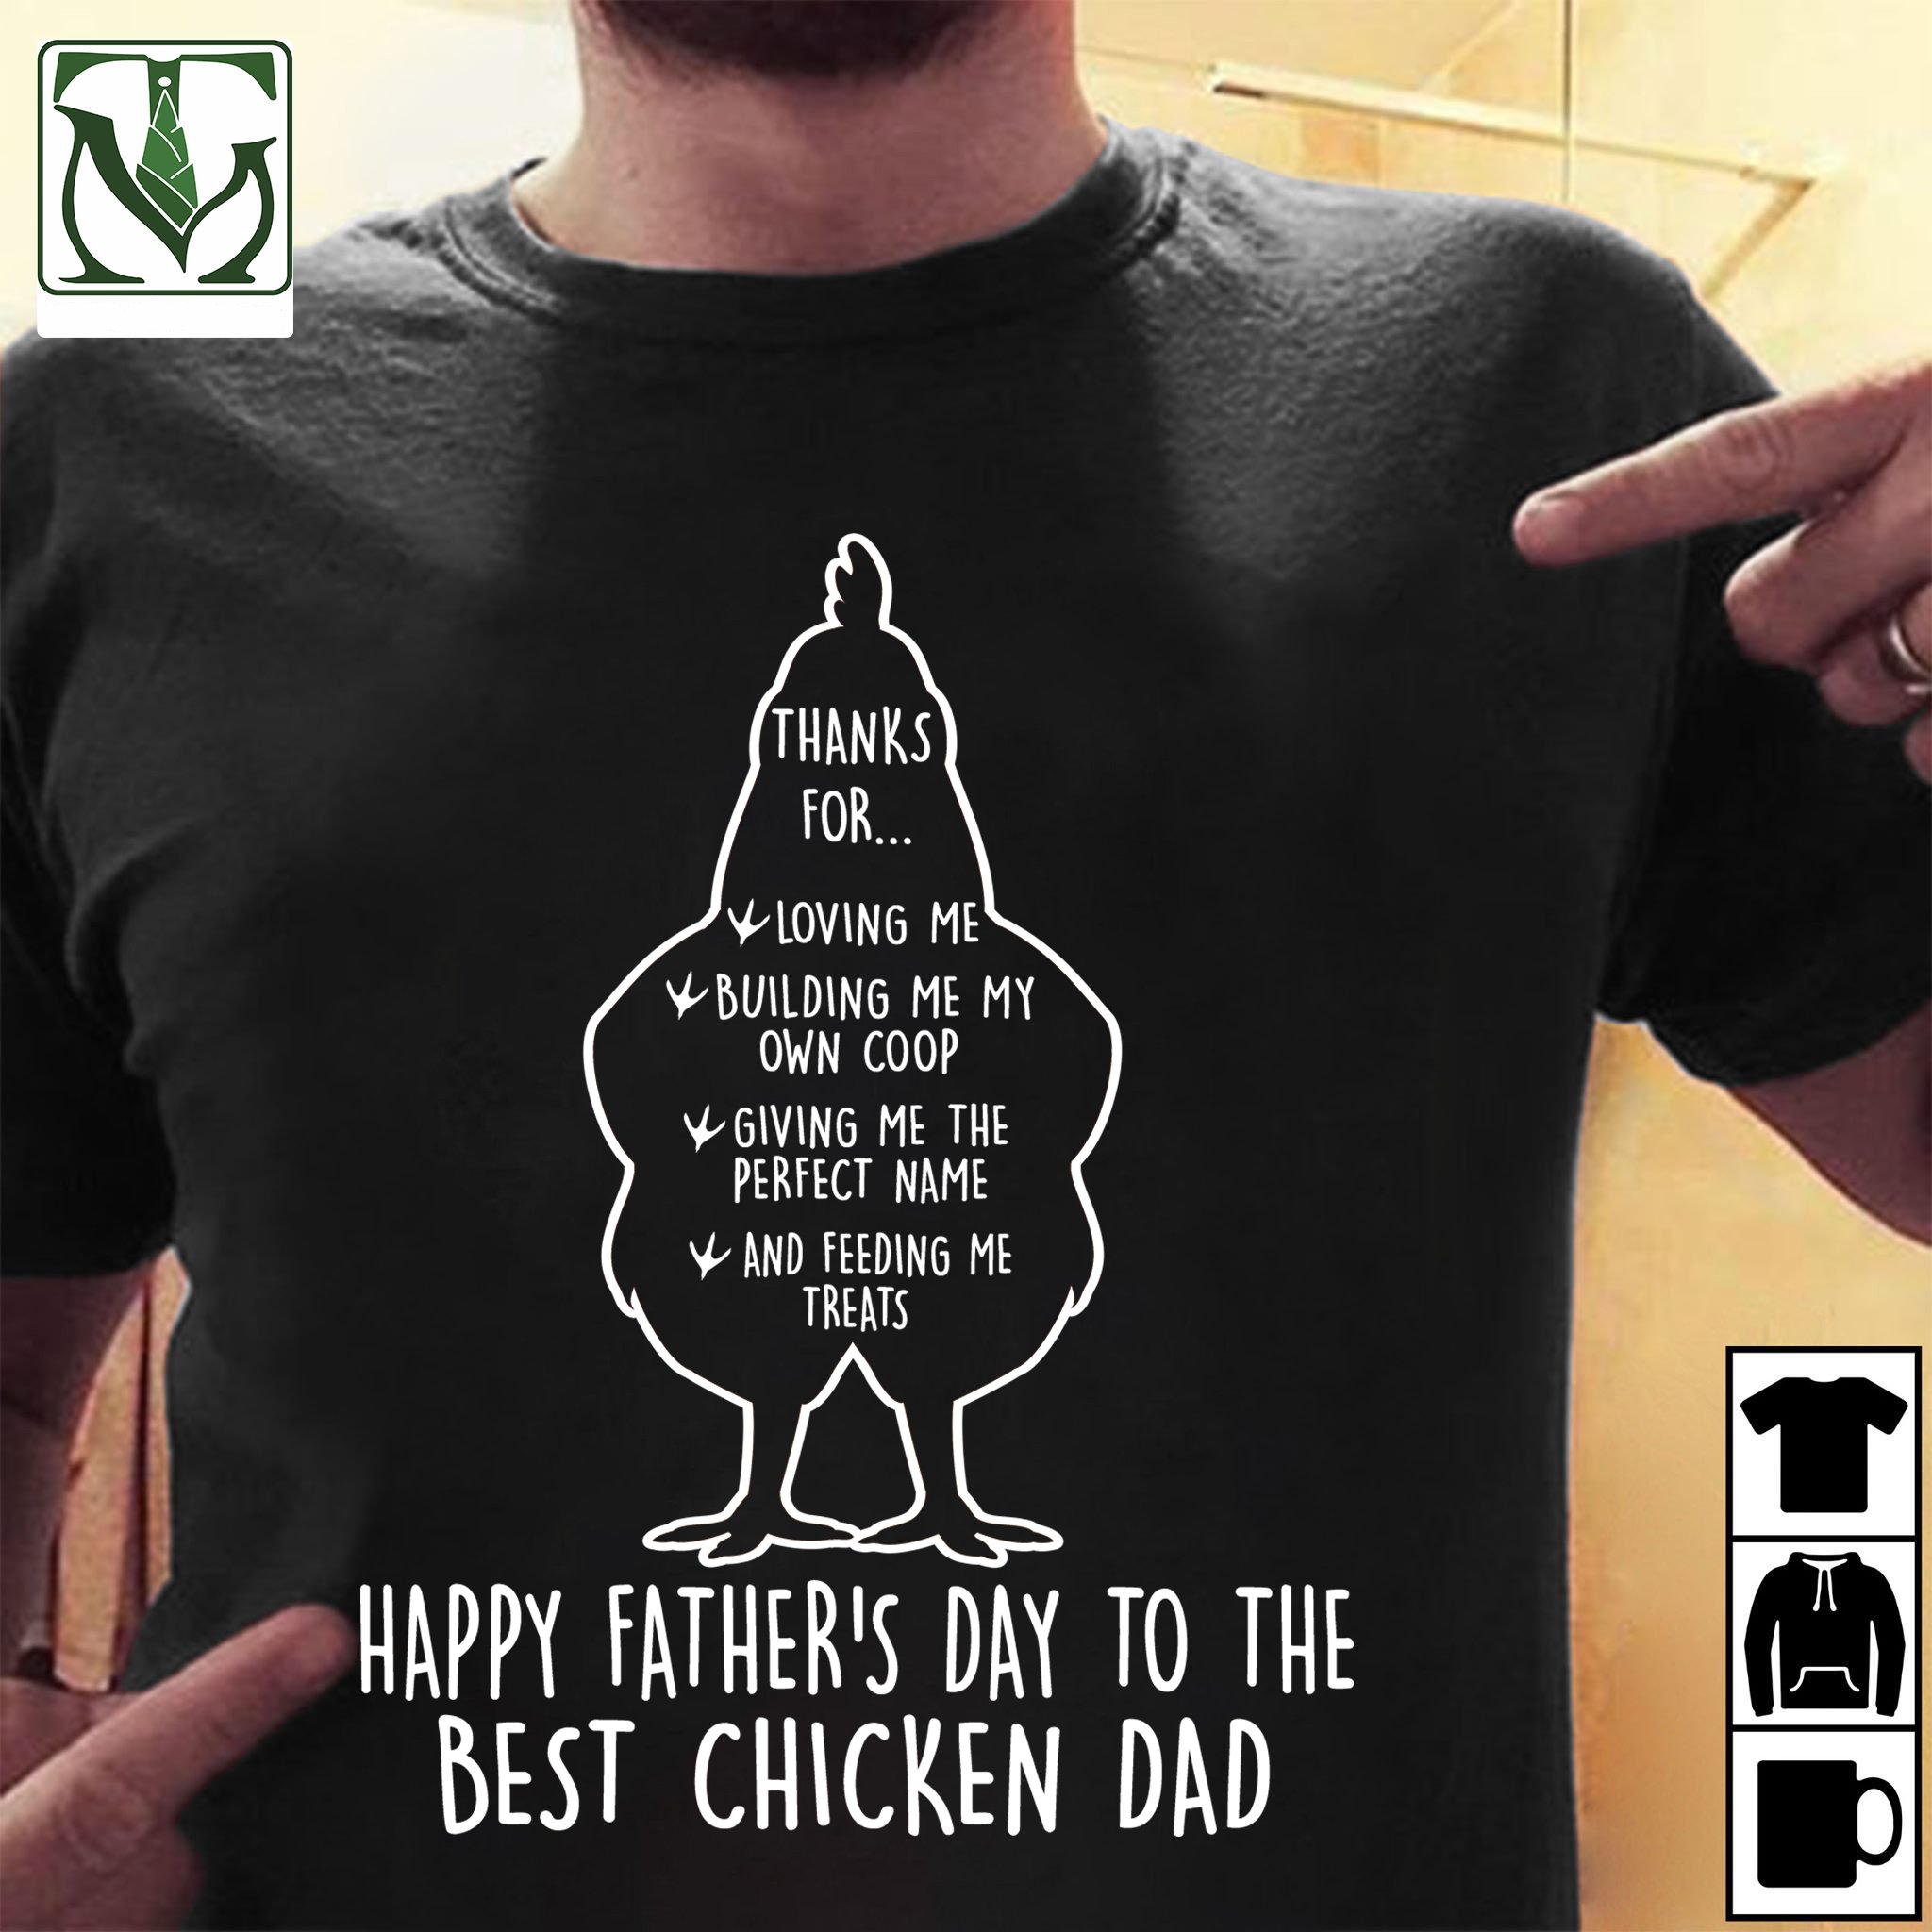 Thanks for loving me, building me my own coop, giving me the perfect name and feeding me treats - Father's day, chicken dad